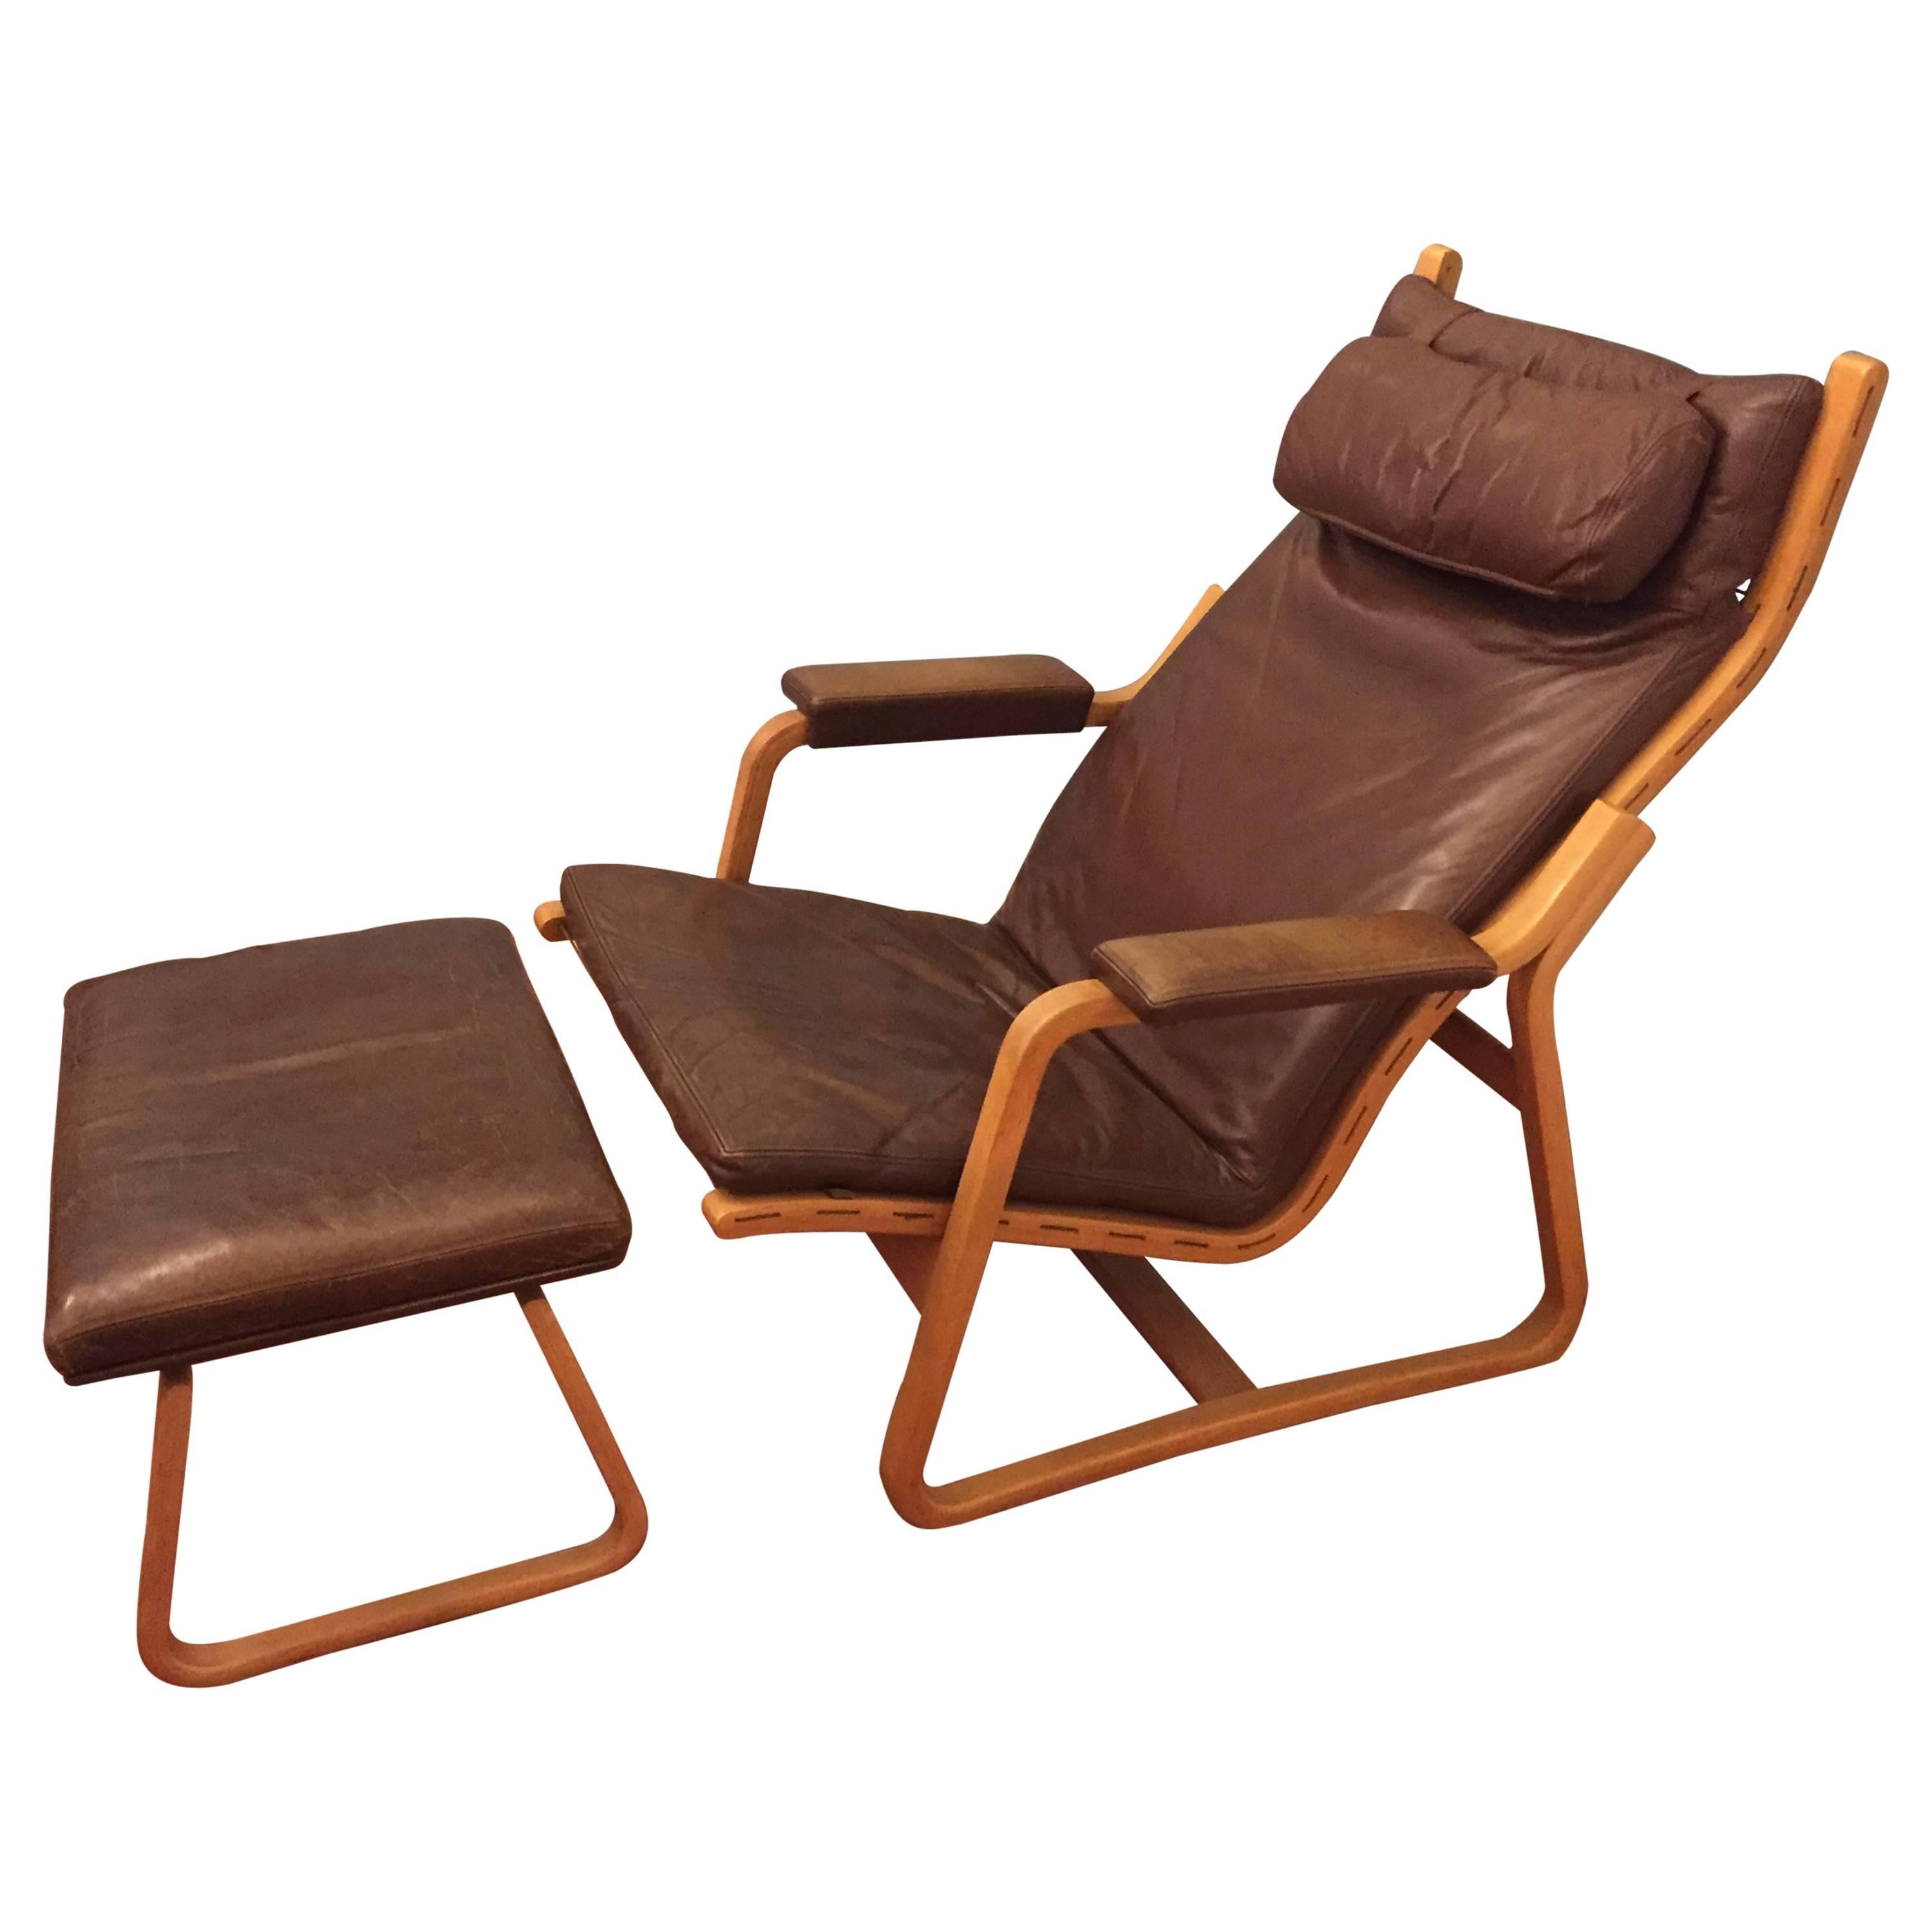 Ditte & Adrian Heath Two Position Leather Lounge Chair with Ottoman